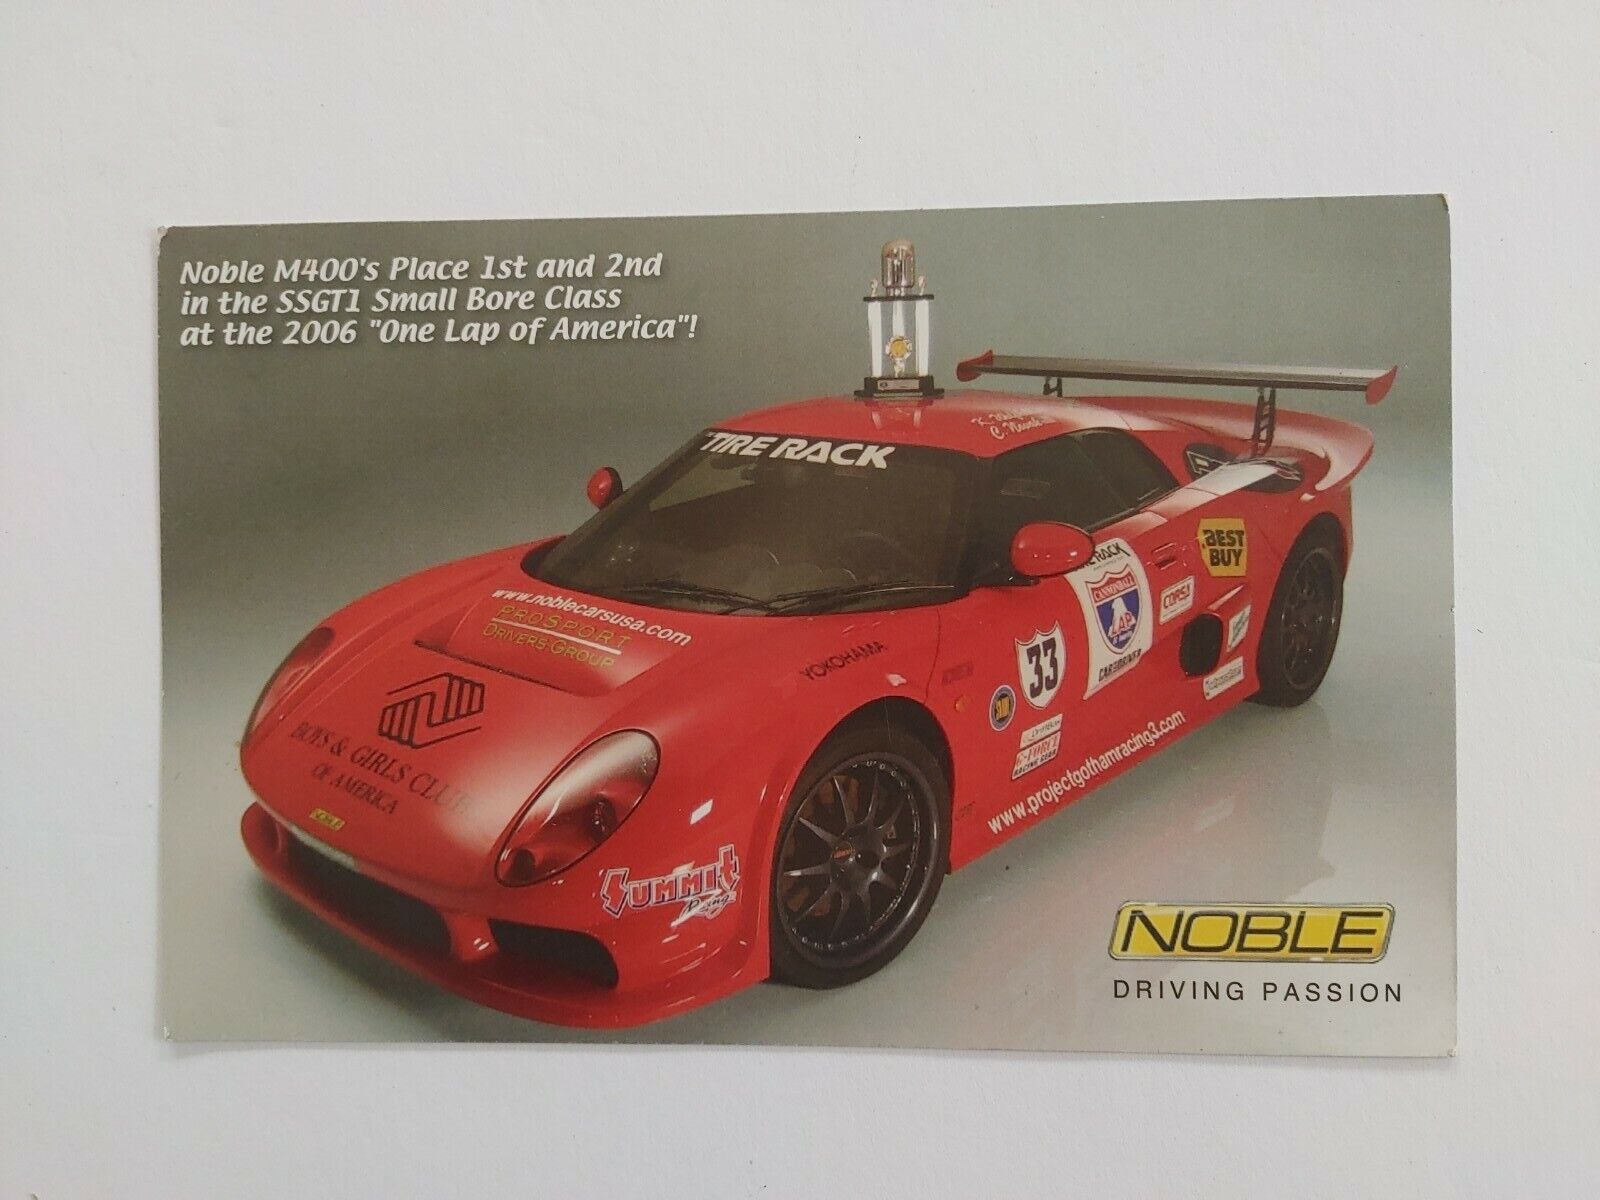 NOBLE M400 AND M12 PROMOTIONAL CARD 5×8.